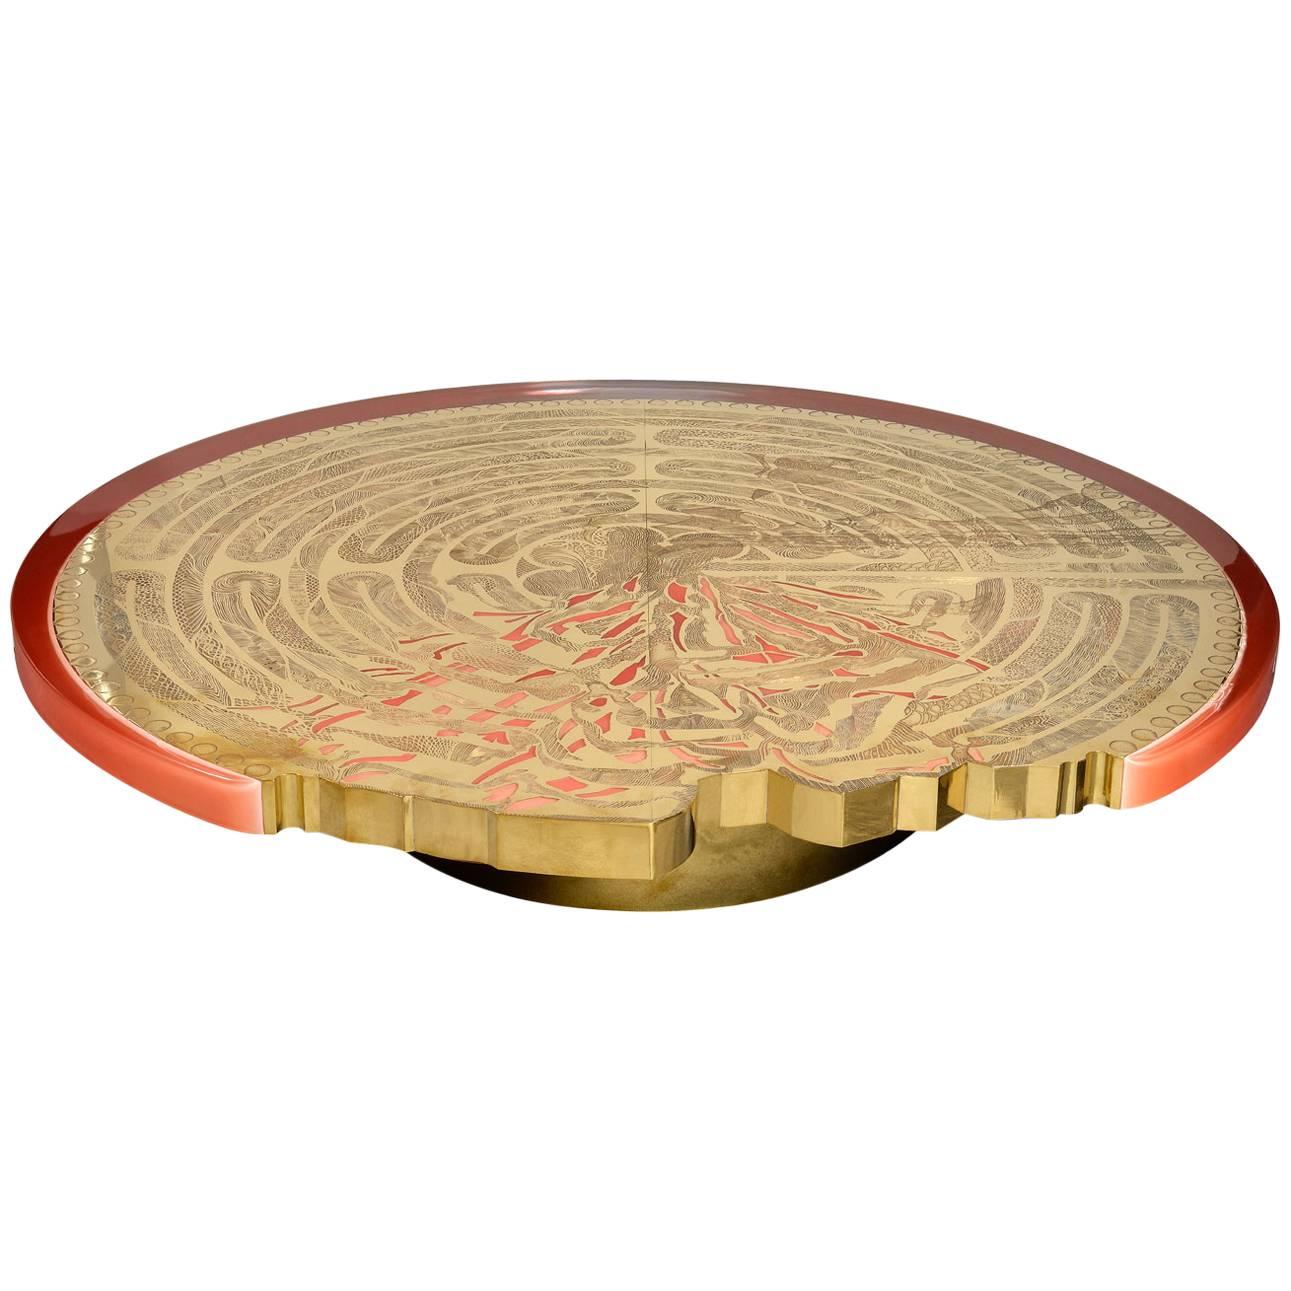 Exceptional Coffee Table by Armand Jonckers "Labyrinth" For Sale